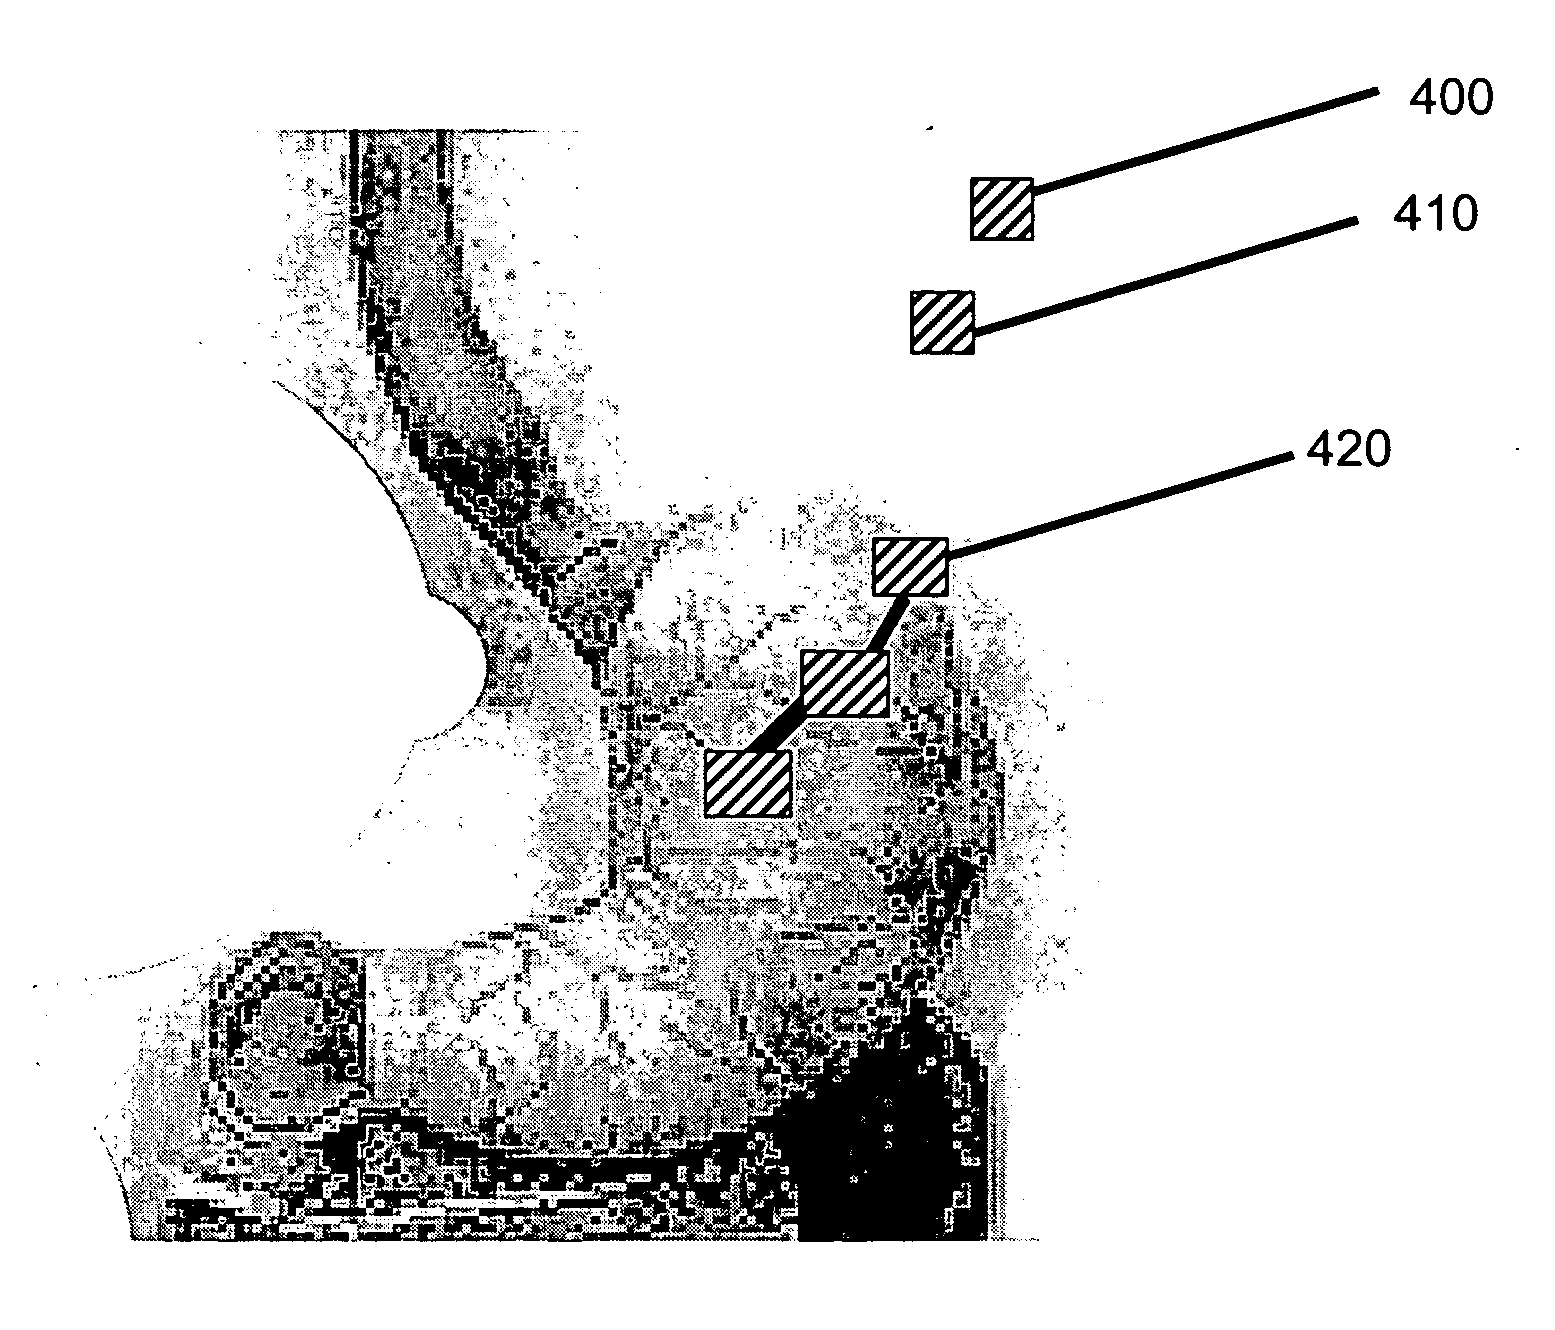 Device for neuromuscular peripheral body stimulation and electrical stimulation (ES) for wound healing using RF energy harvesting